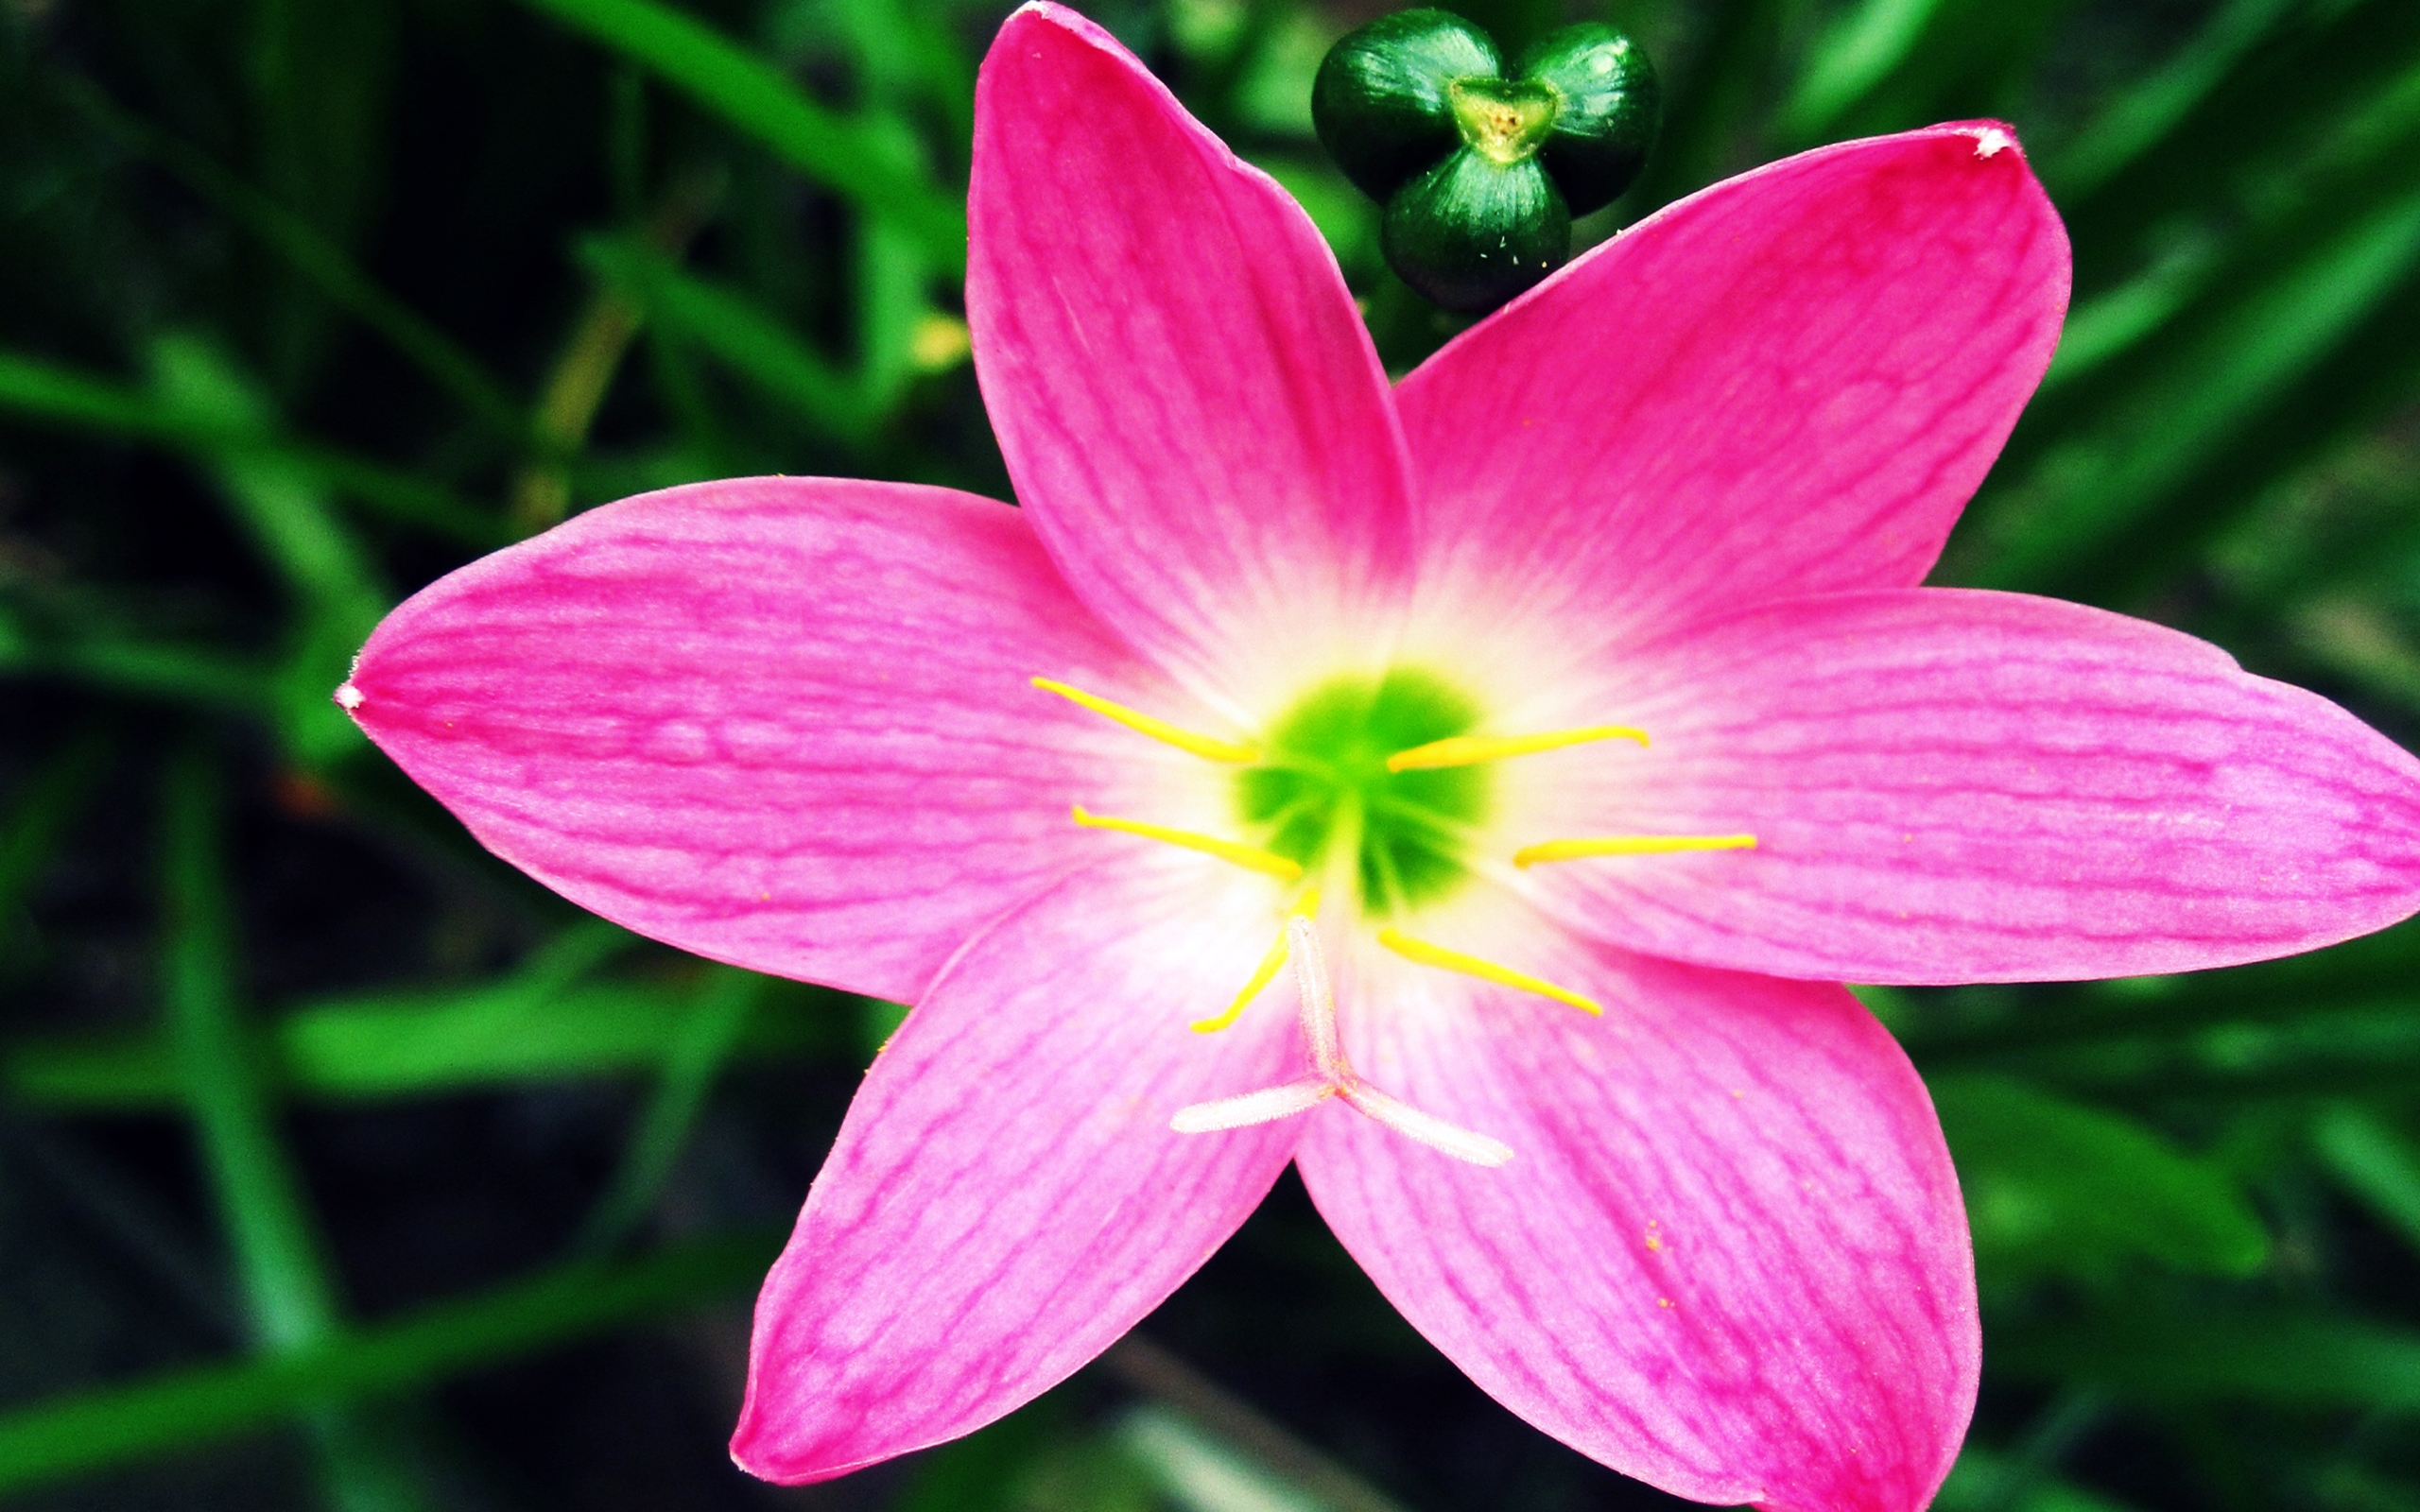 Pink Flower And A Green Background Wallpaper 2560x1600 : Wallpapers13.com